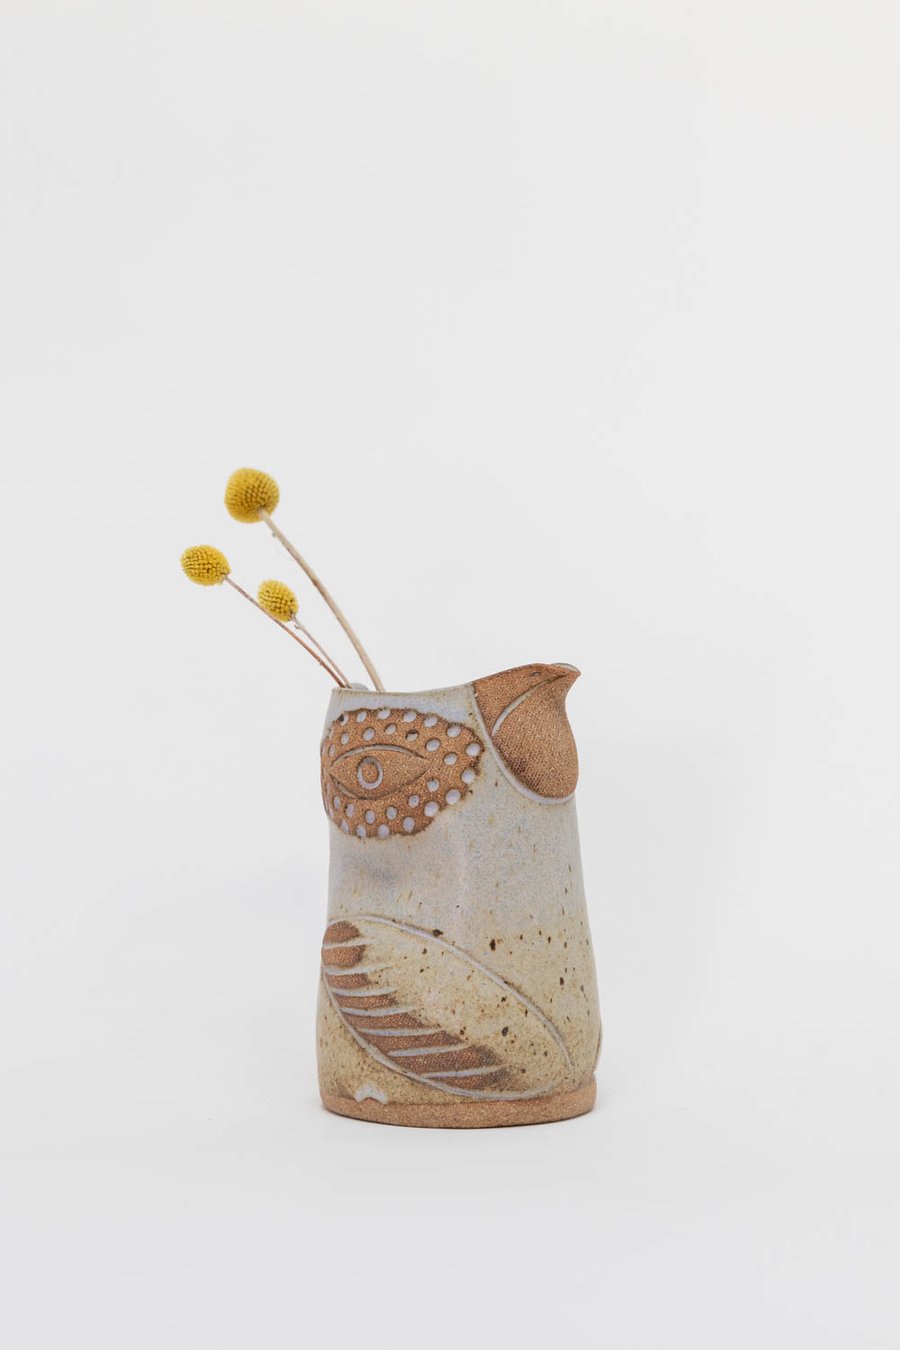 Image of Dotted Almond Eye Lavender Flying Handleless Pitcher